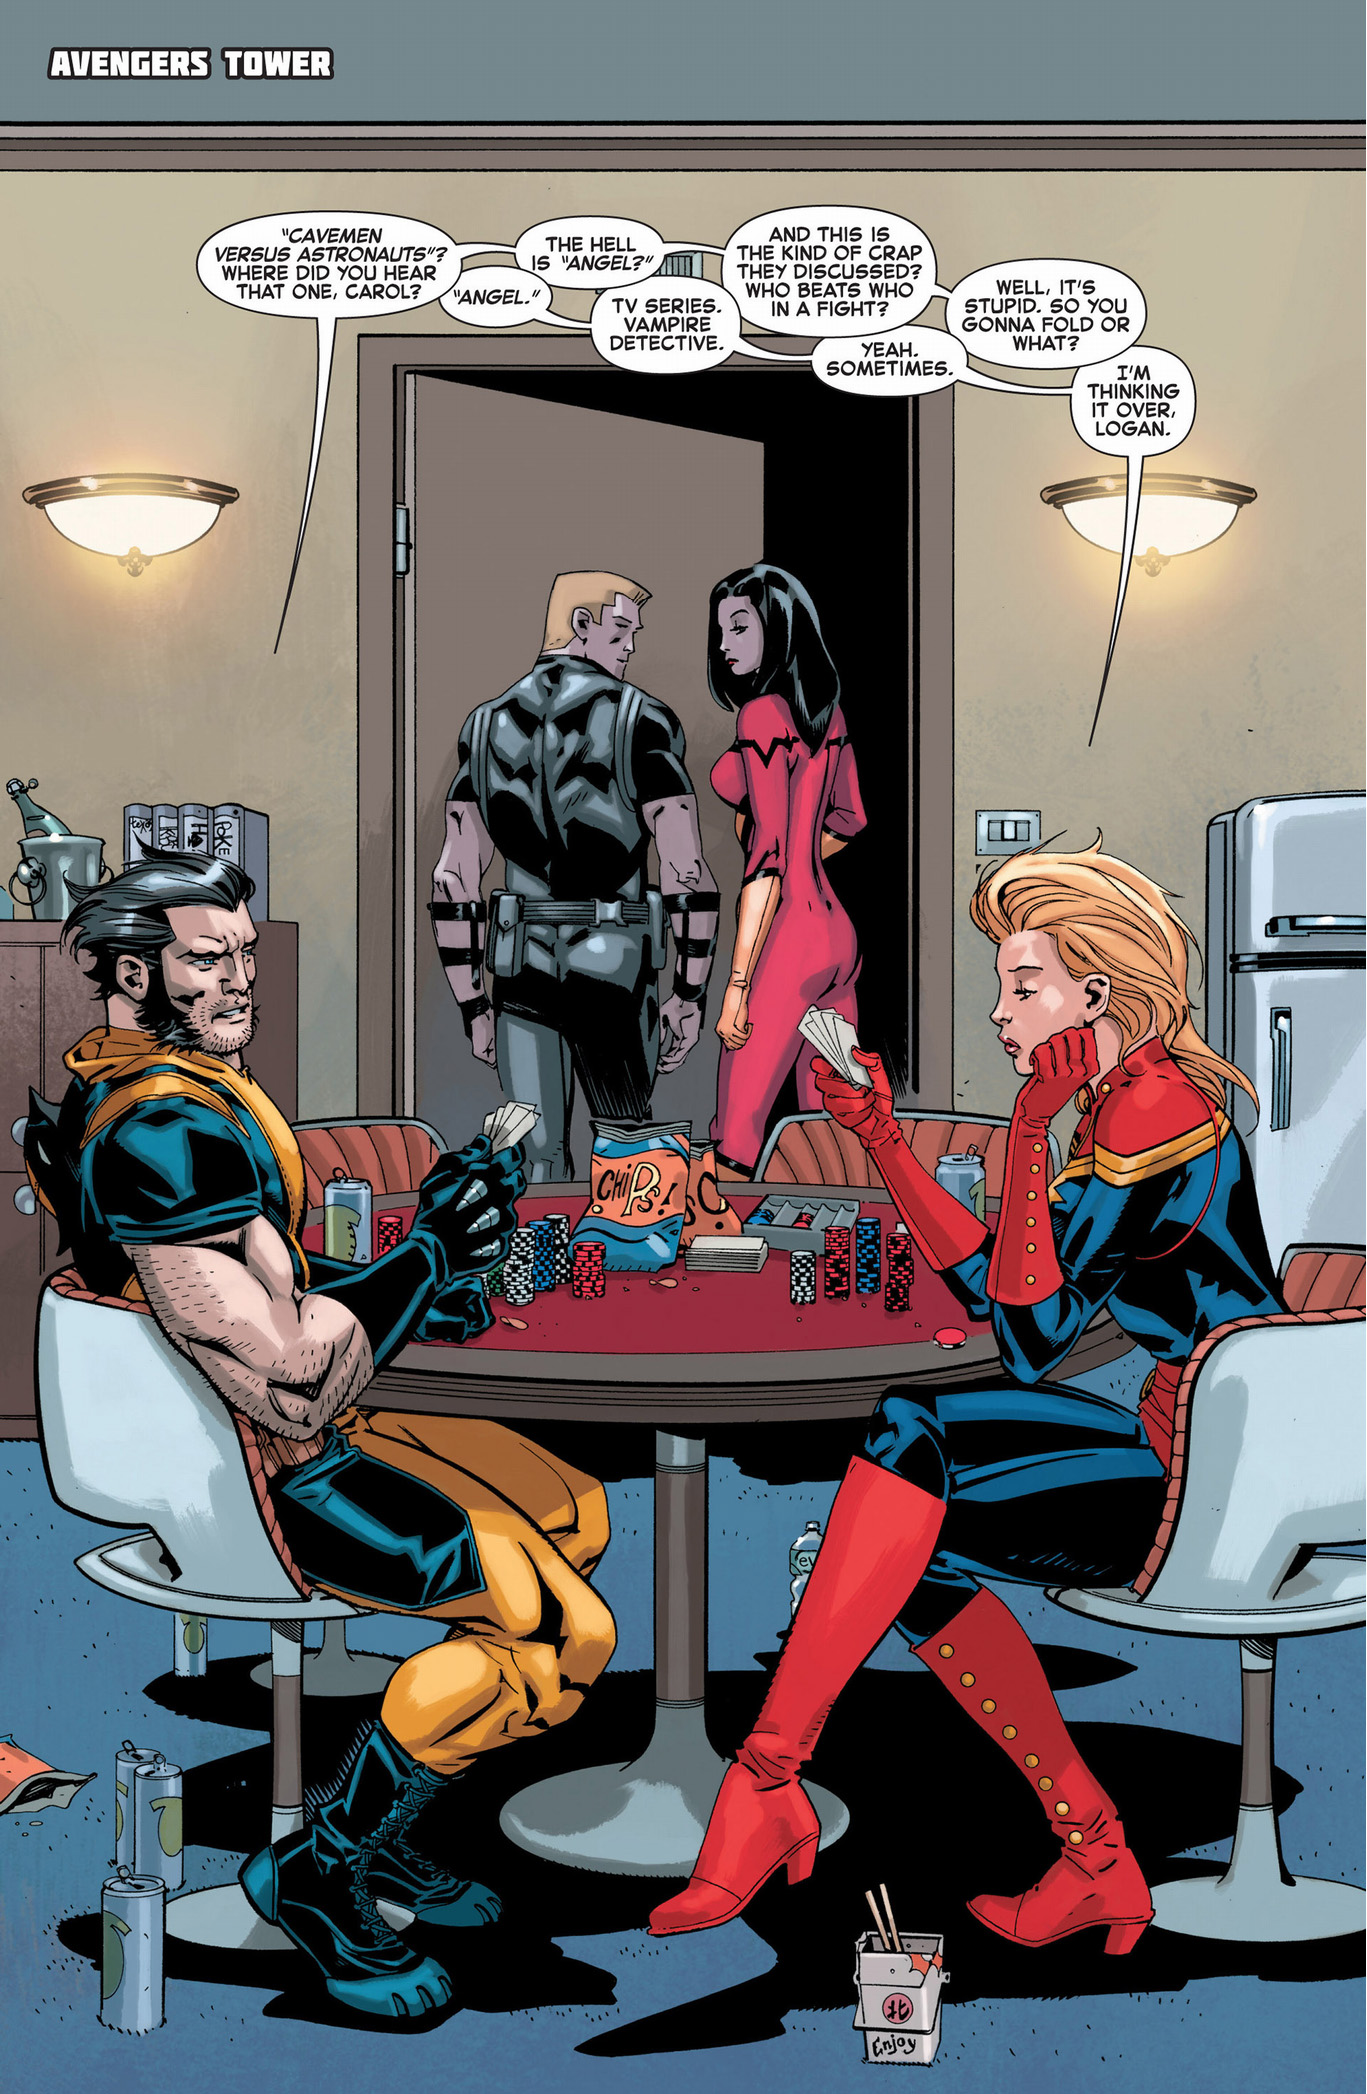 wolverine and captain marvel having a debate